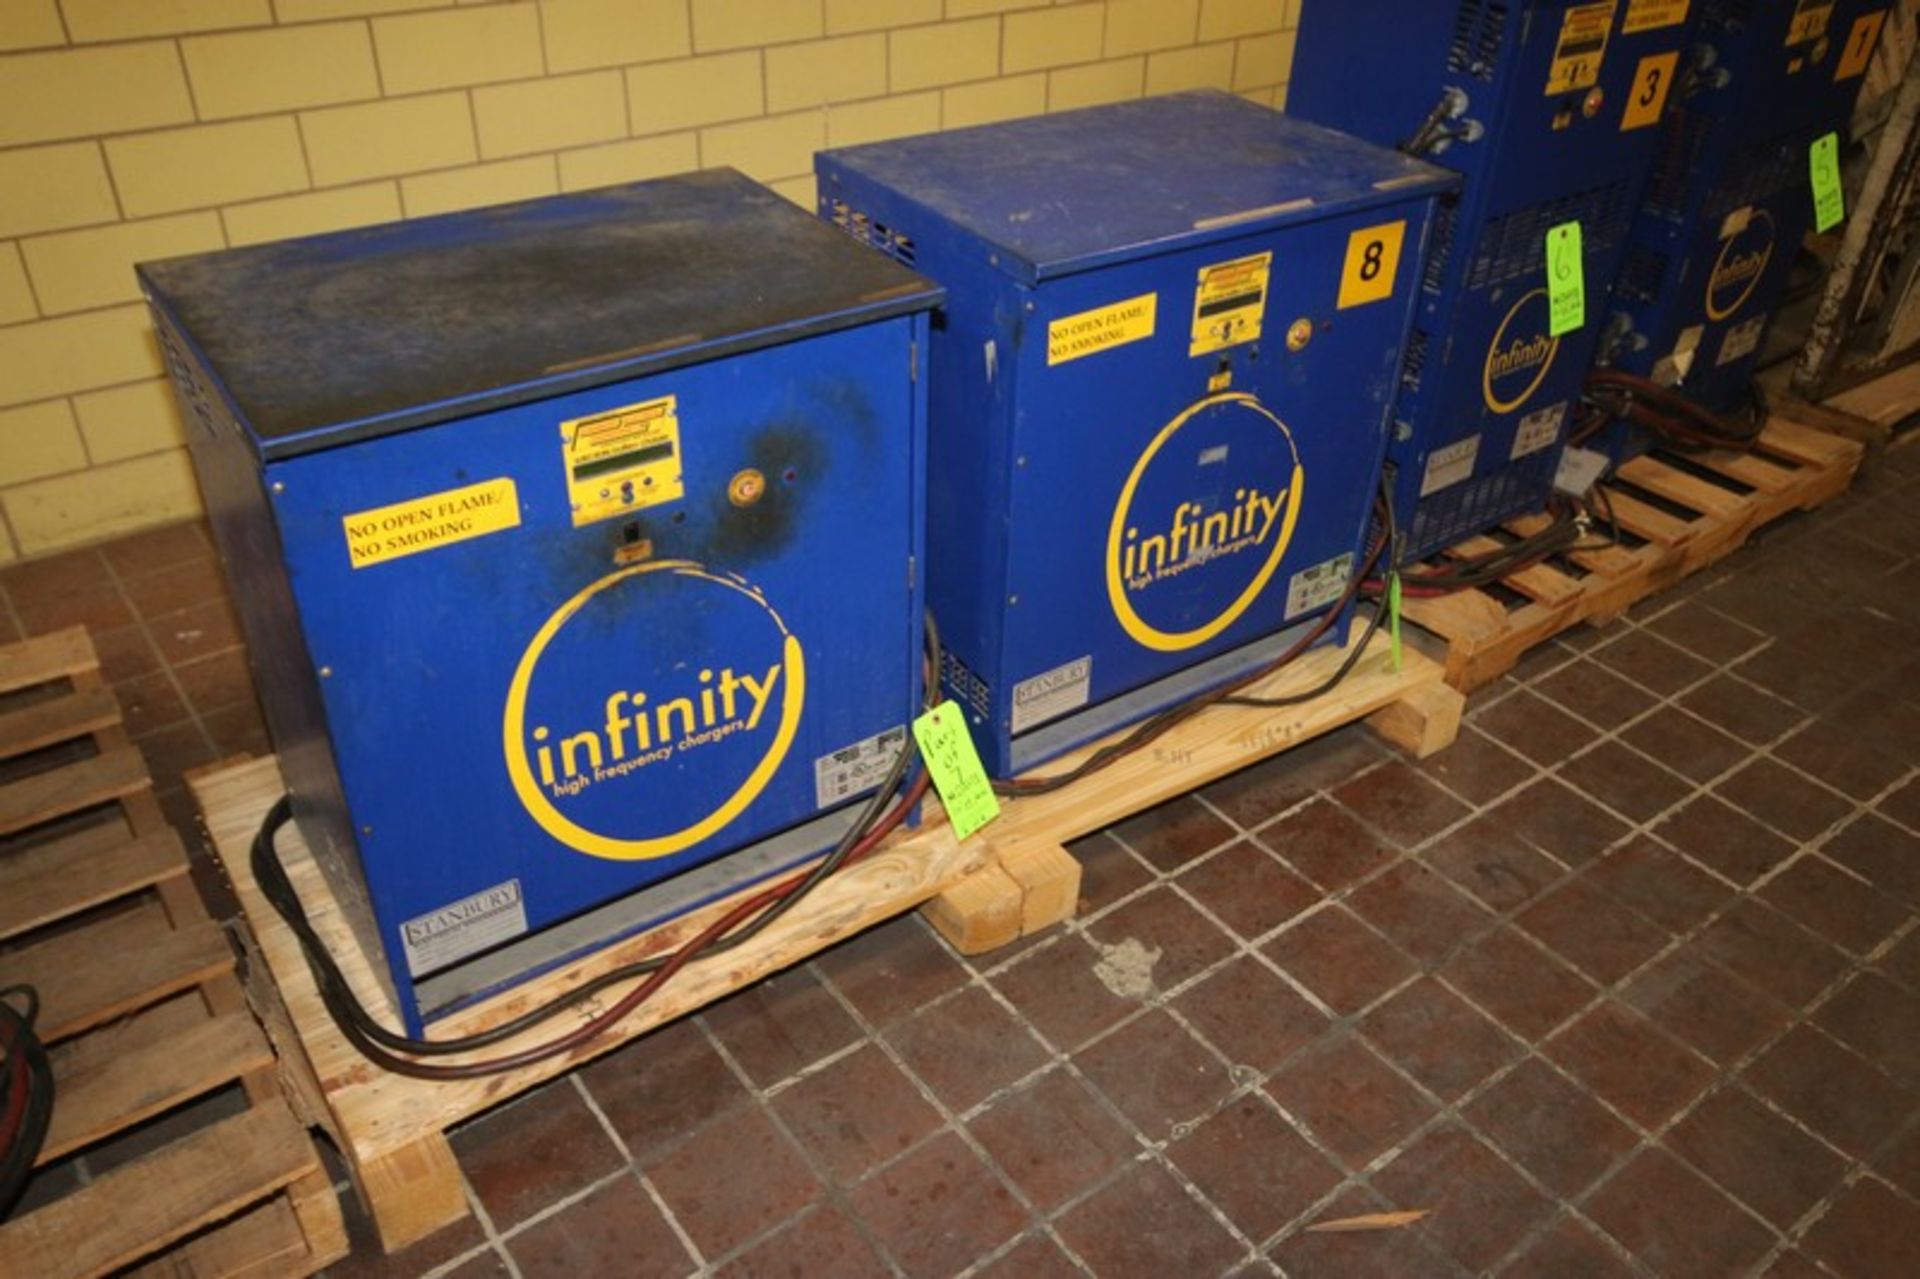 Infinity High Frequency Battery Chargers, M/N PEI 12/6.5, S/N 2013010702 & 2013041001, 480 Volts, - Image 2 of 8